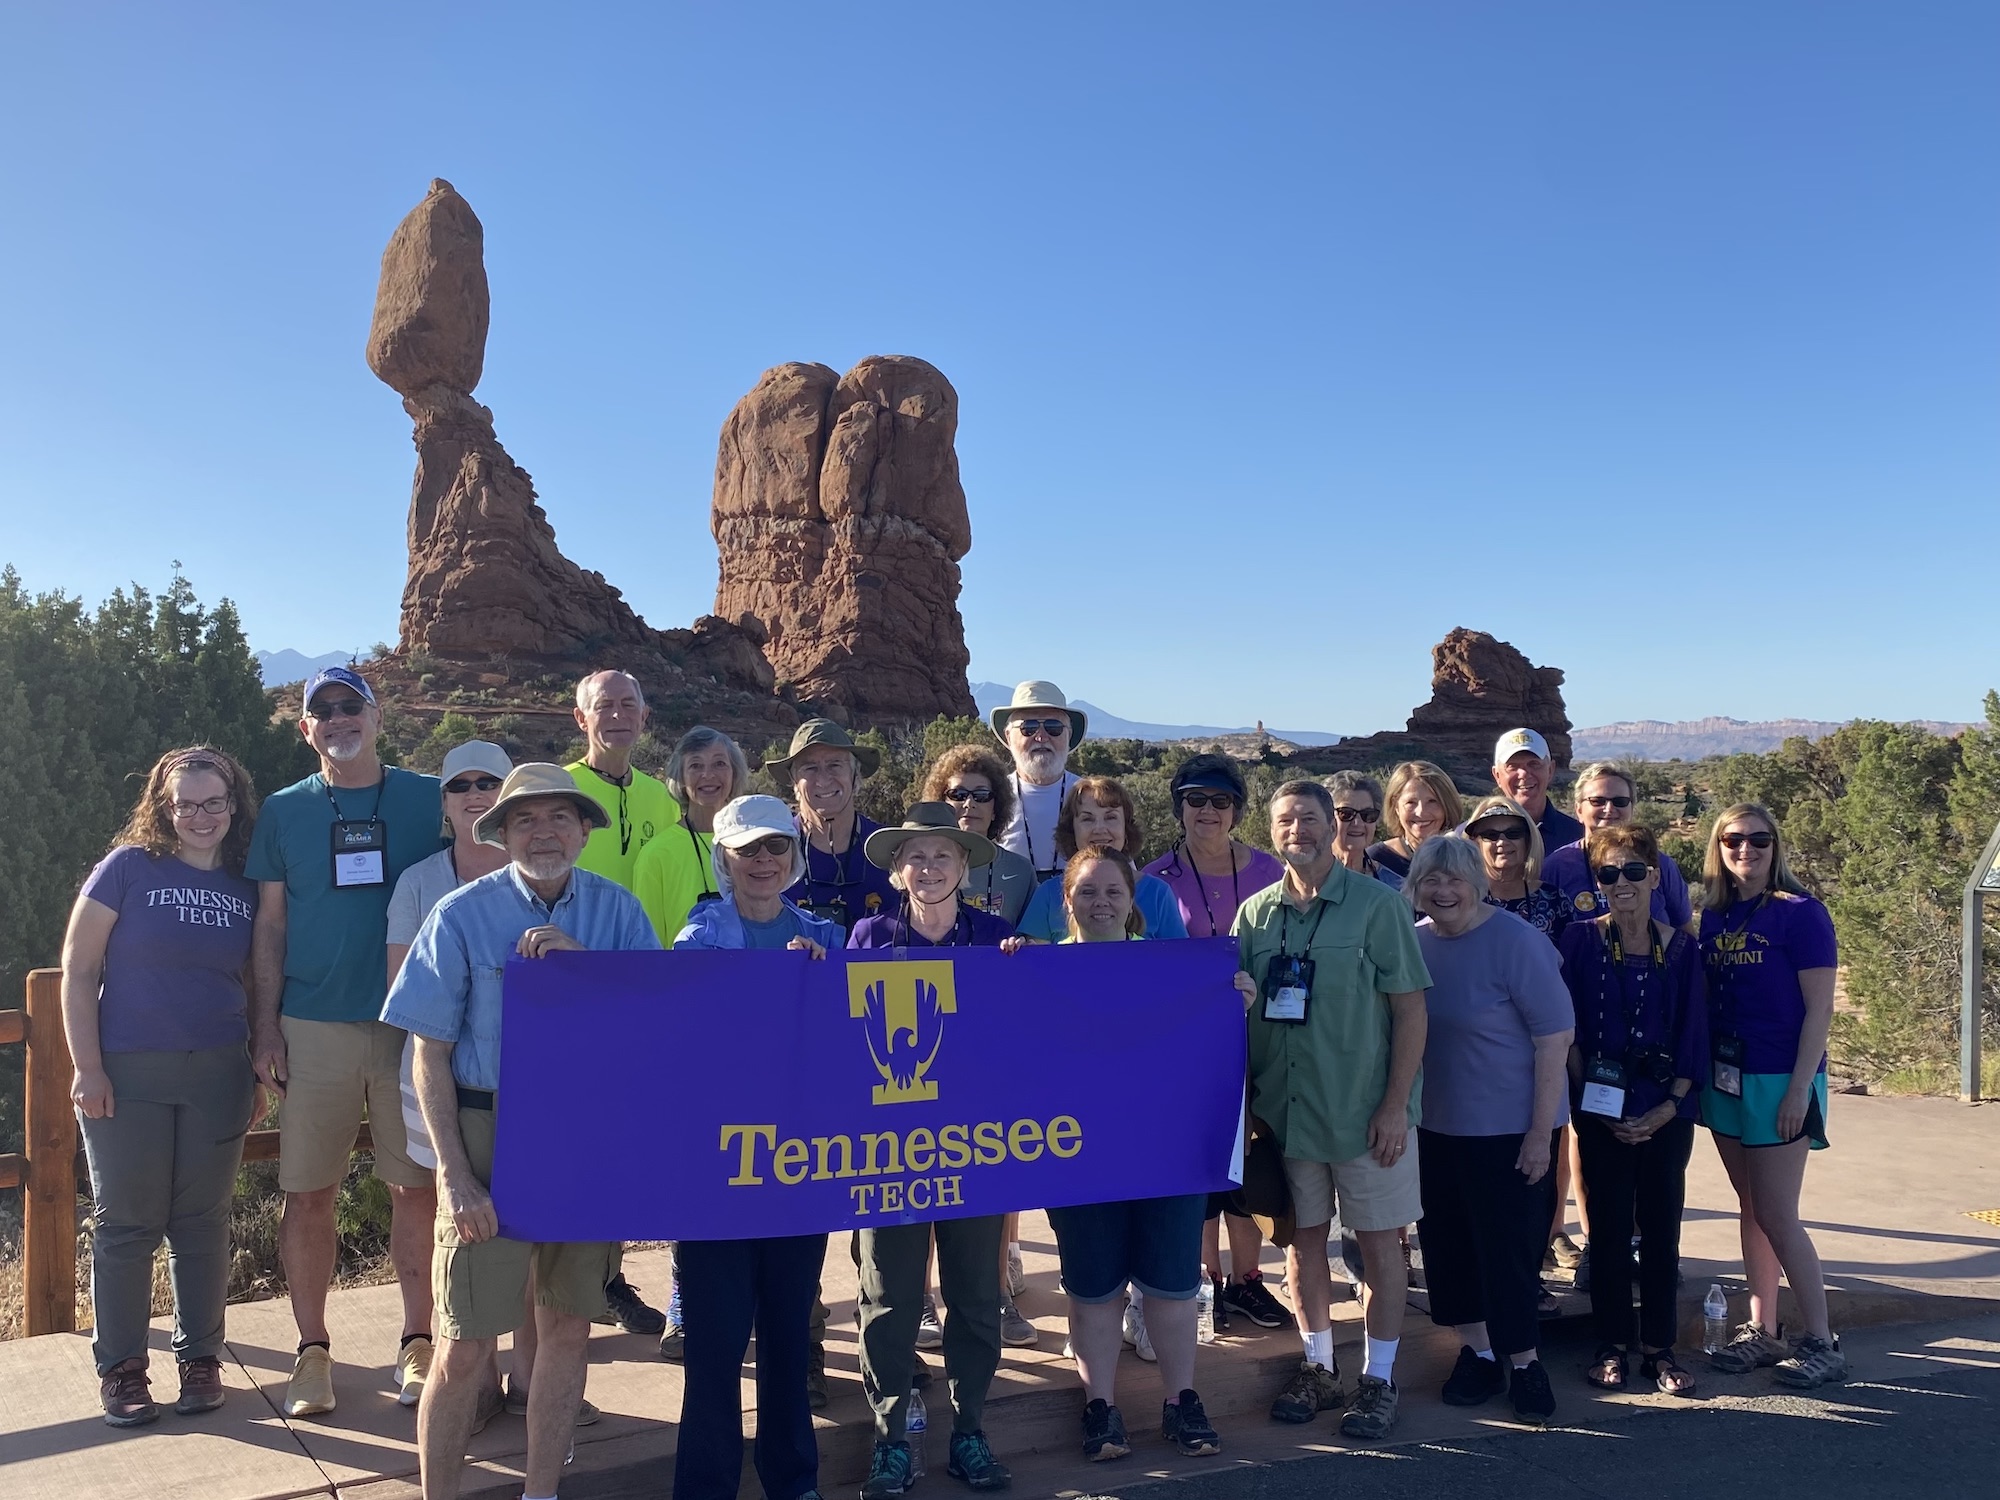 Tennessee Tech alumni stand in front of balancing rock at Arches National Park. They are holding a Tennessee Tech banner.